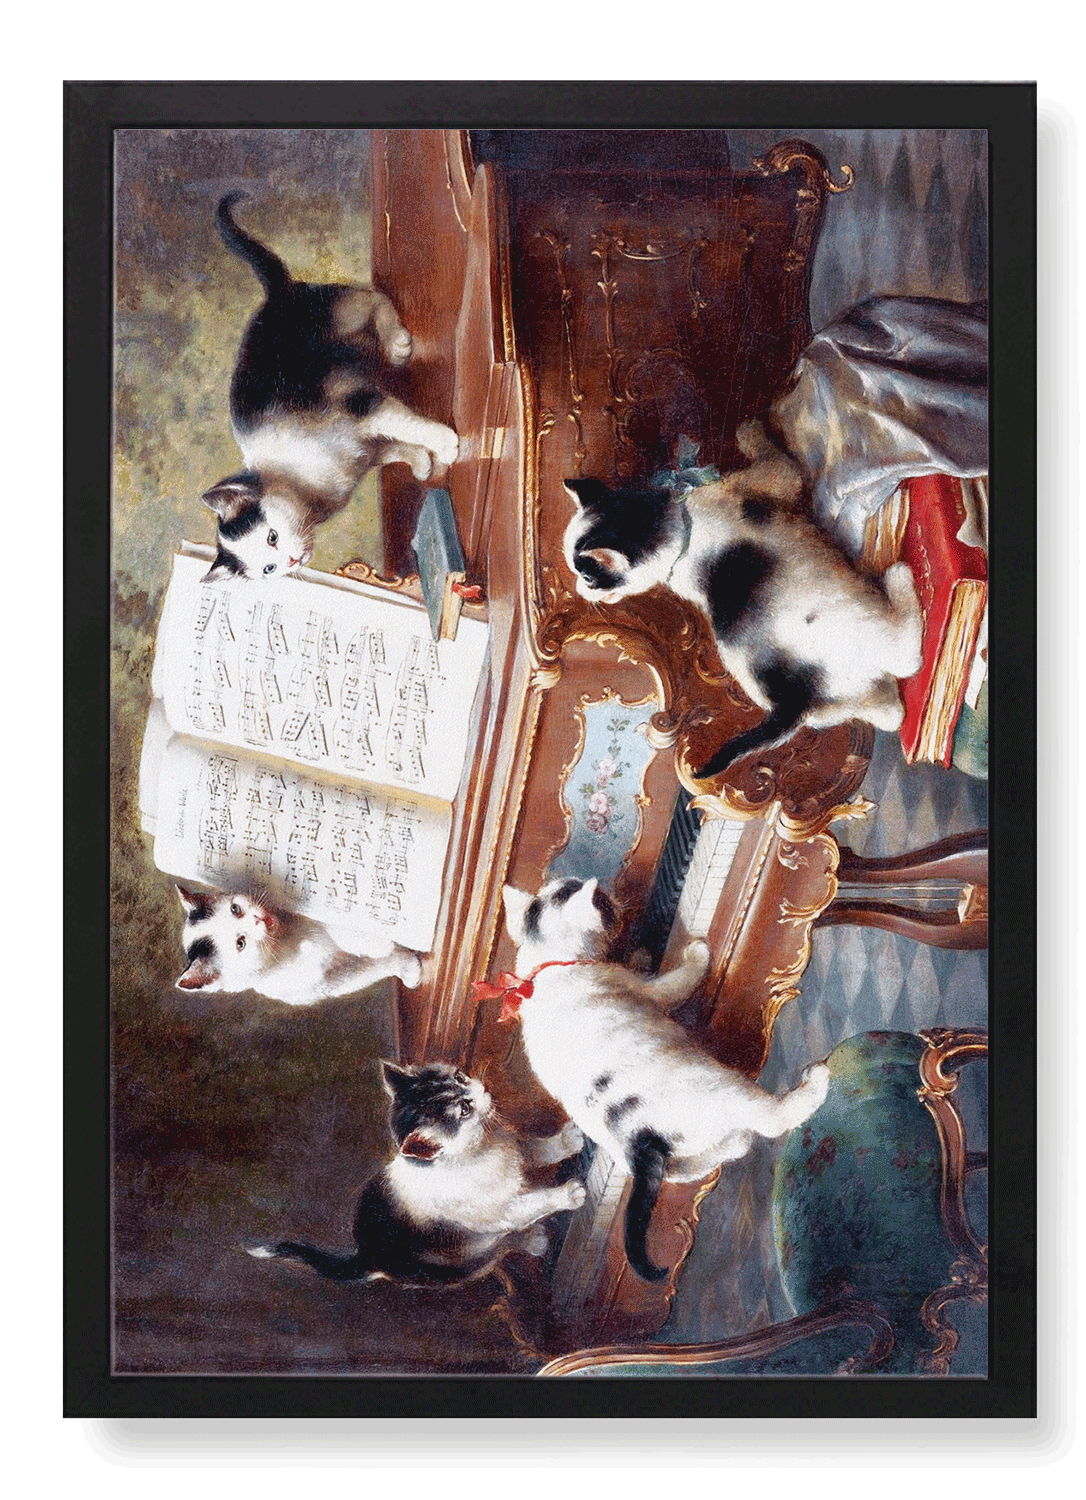 CATS AND MUSIC